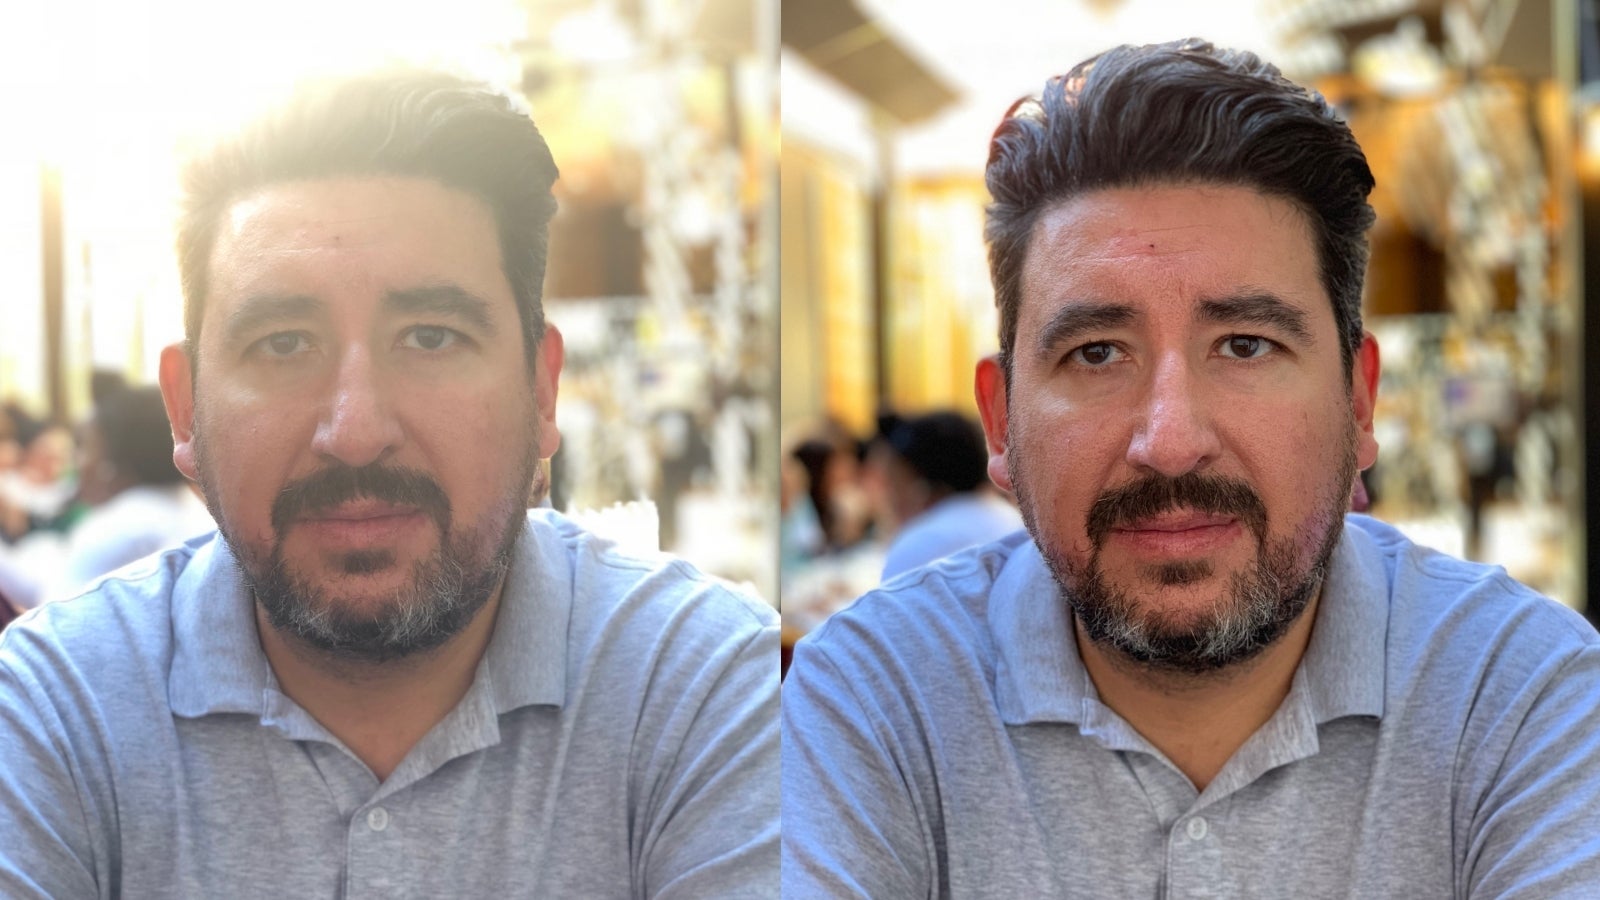 Despite looking exactly the same as the iPhone X, the iPhone XS brought massive upgrades to the iPhone camera processing. Just look at the difference in this photo courtesy of MactechNews. - 6 months later, iPhone 14 is Apple’s worst upgrade ever: Tim Cook’s big apology - new iPhone 15!